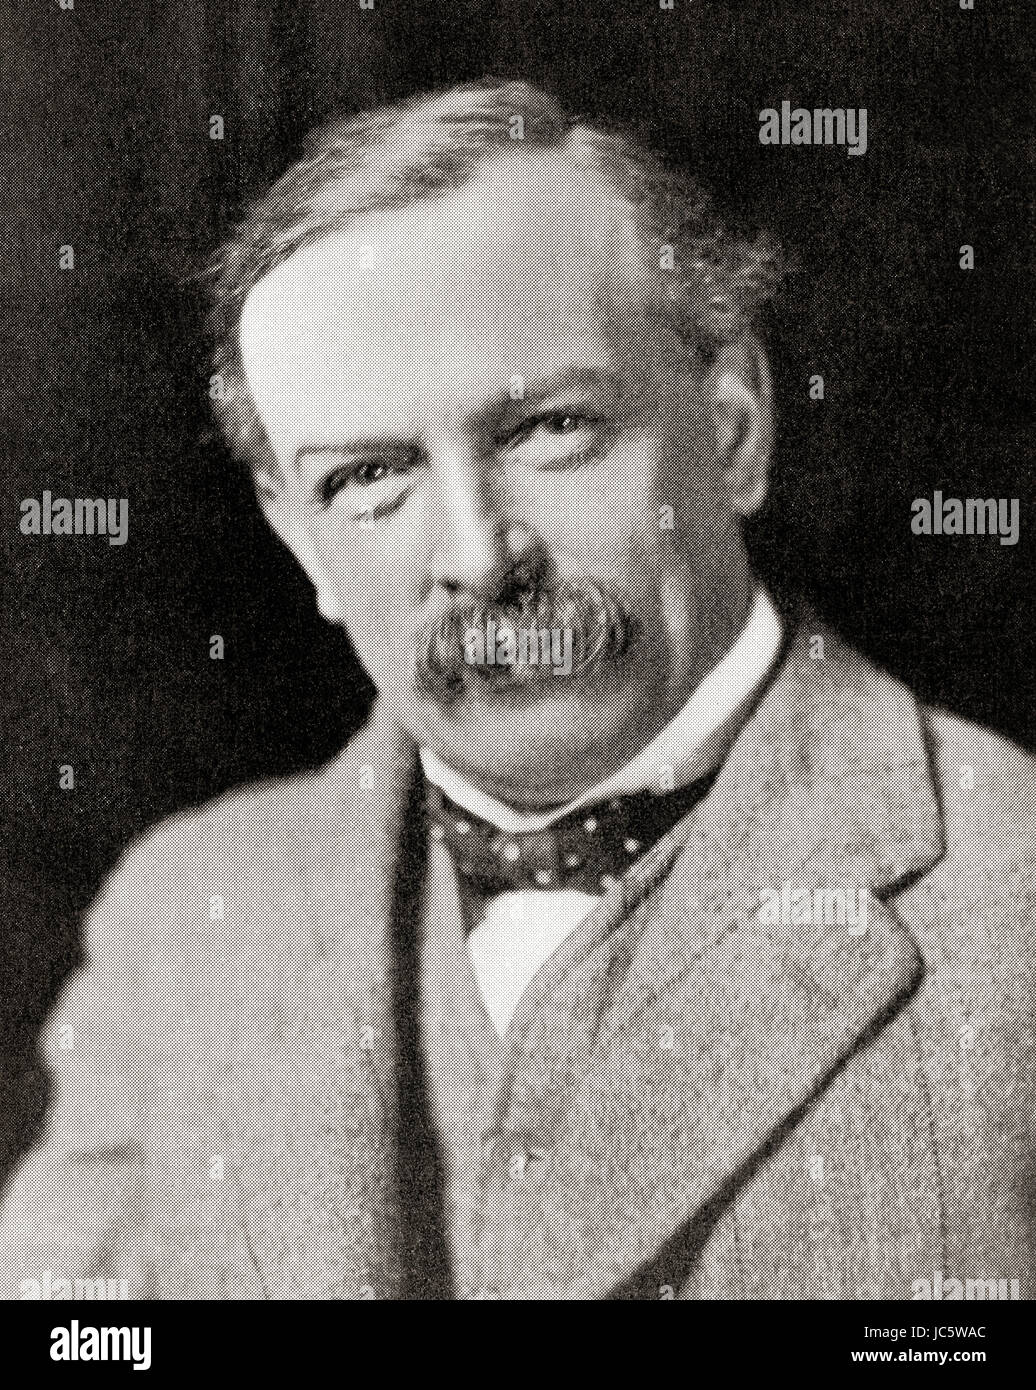 David Lloyd George, 1st Earl Lloyd-George of Dwyfor,1863 – 1945.  British Liberal politician and statesman.  From Hutchinson's History of the Nations, published 1915. Stock Photo